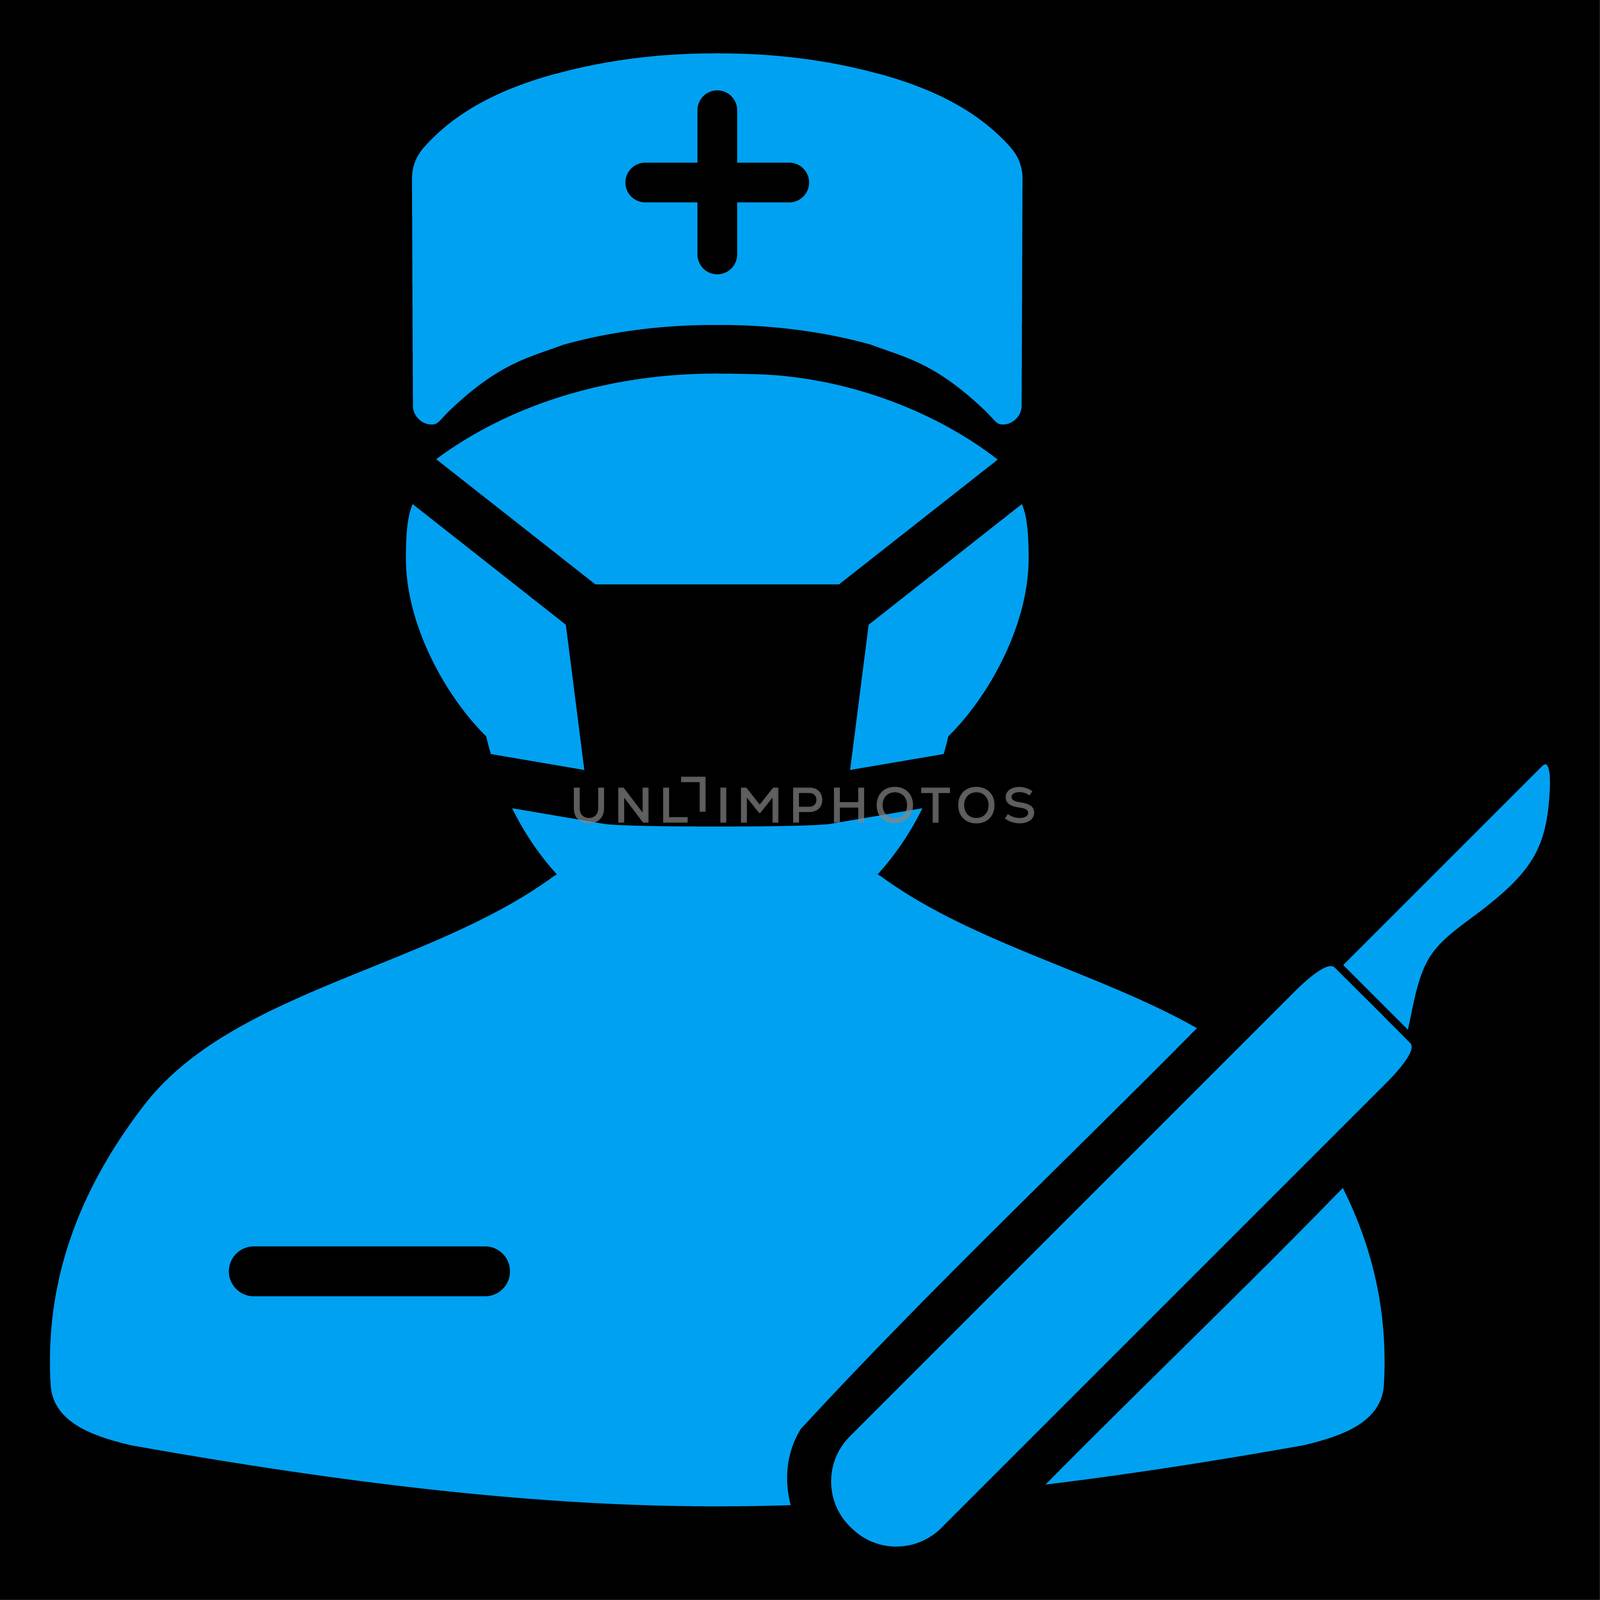 Surgeon raster icon. Style is flat symbol, blue color, rounded angles, black background.